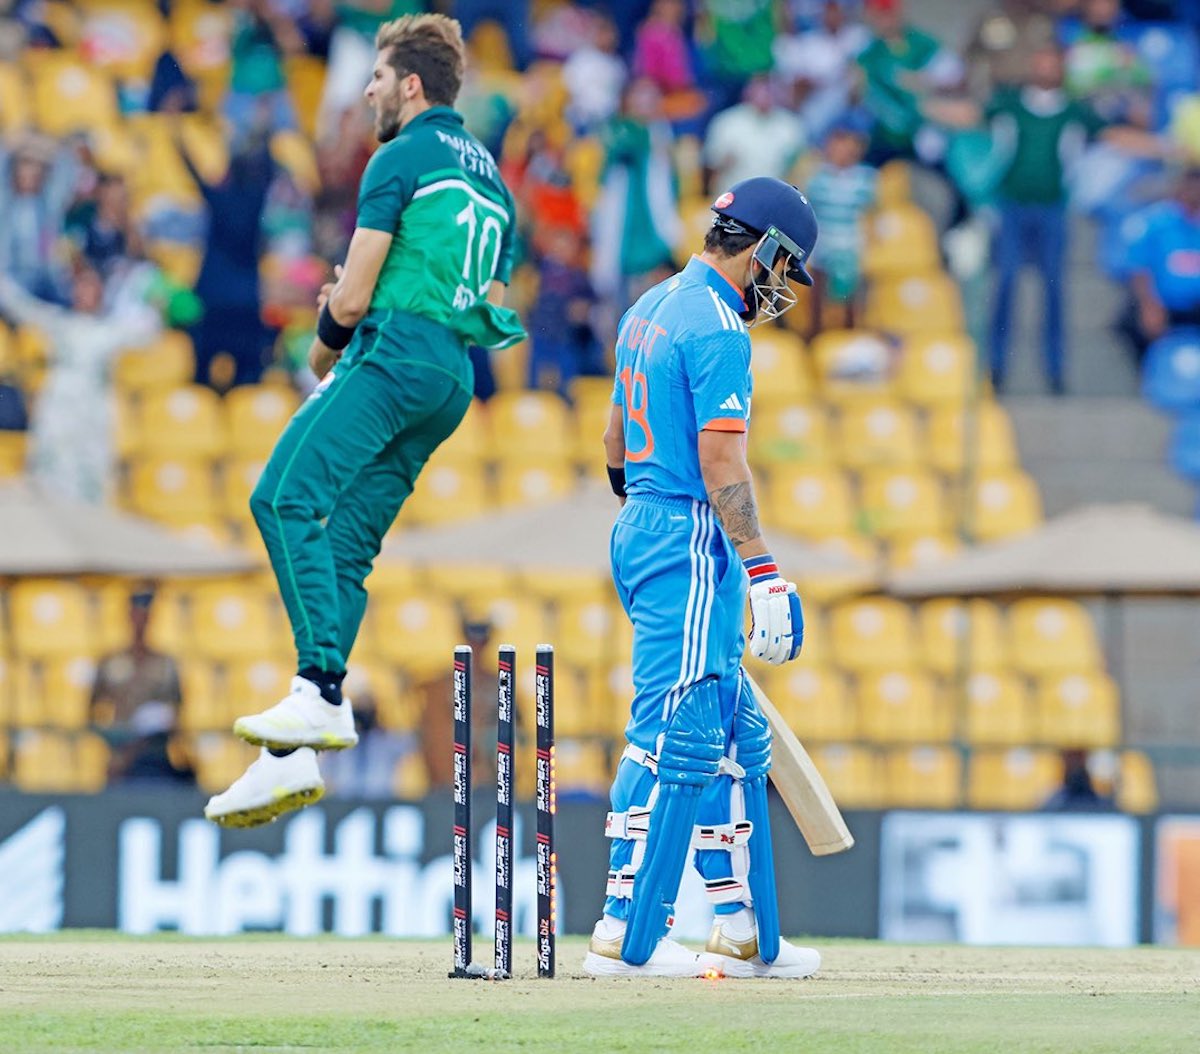 Why India fears Pakistan's pace trio on flat wickets?